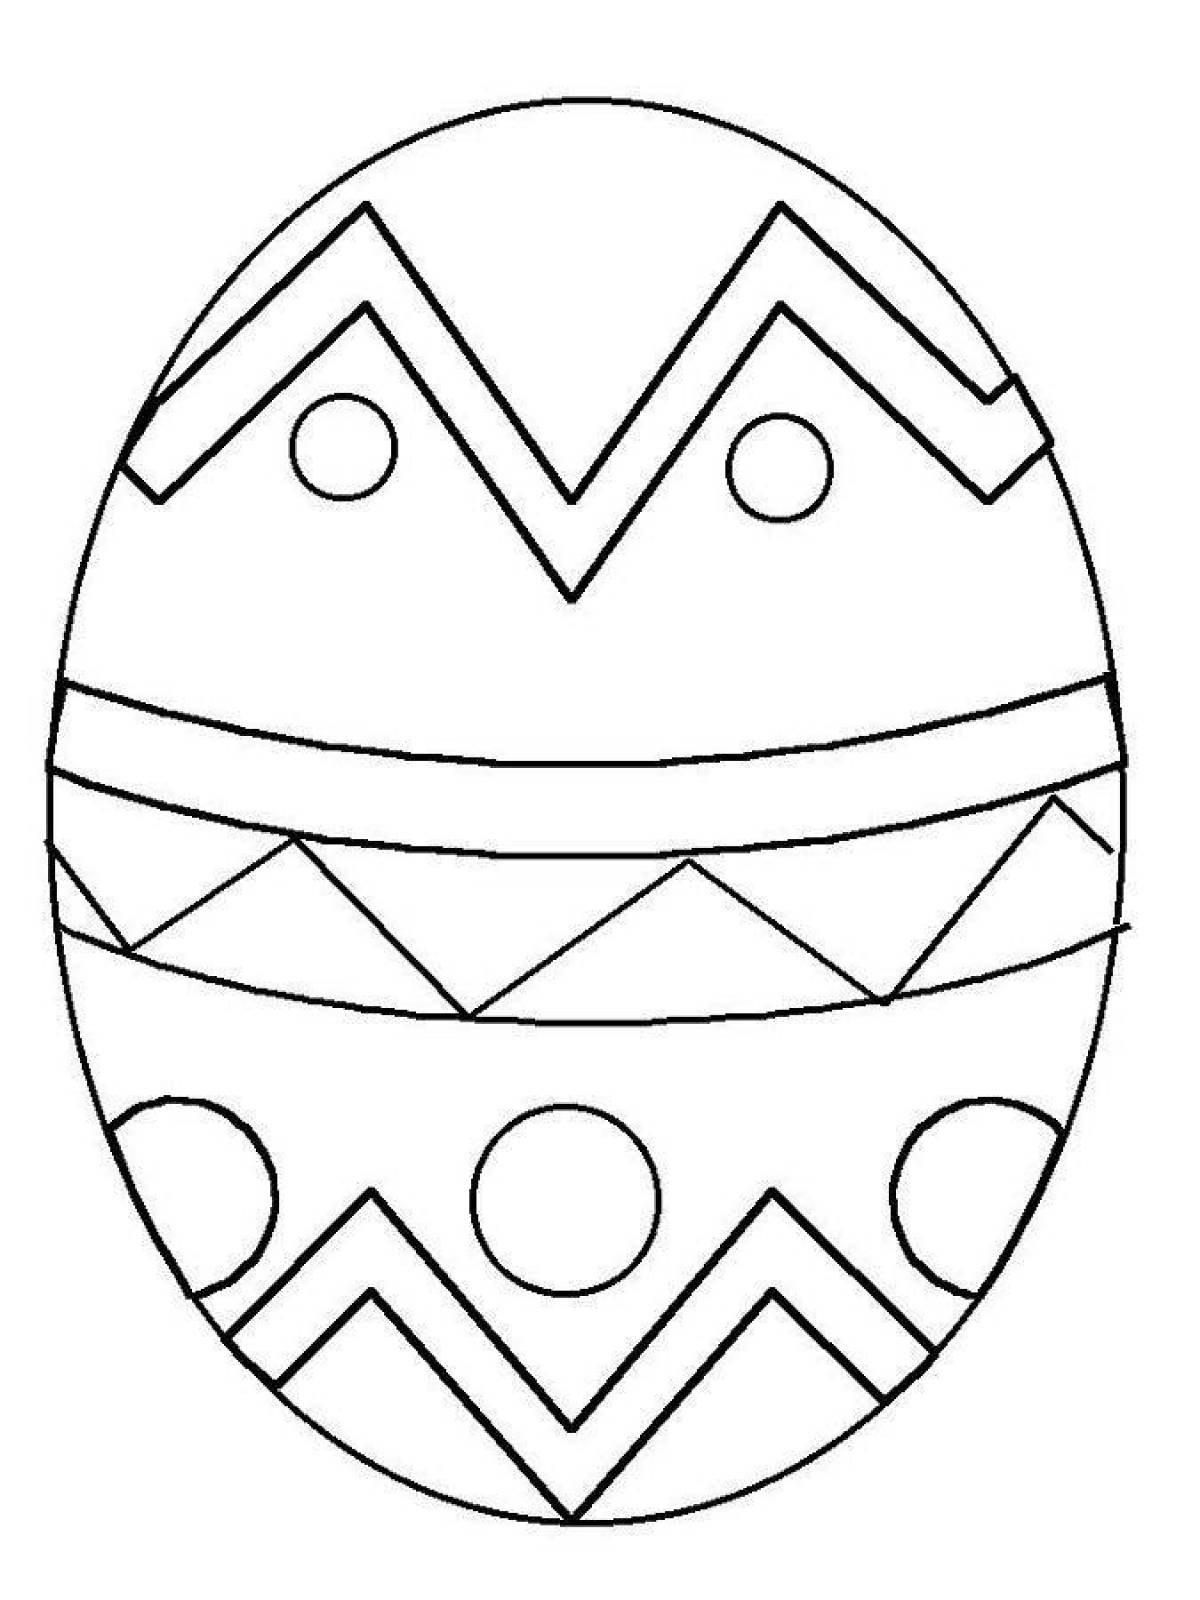 Humorous Easter egg coloring